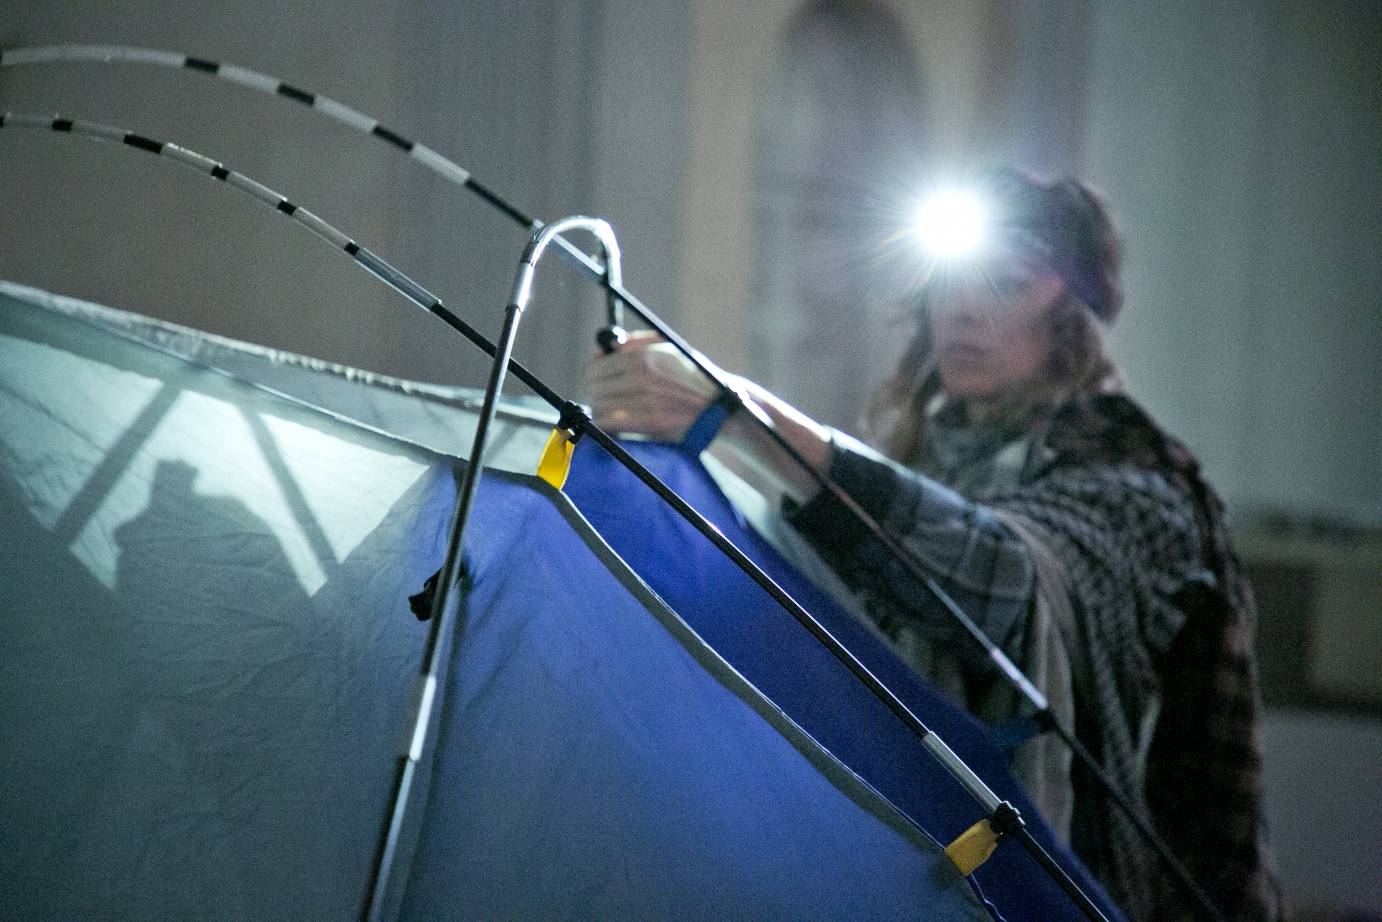 A woman investigates a camping tent while wearing a miner's hat